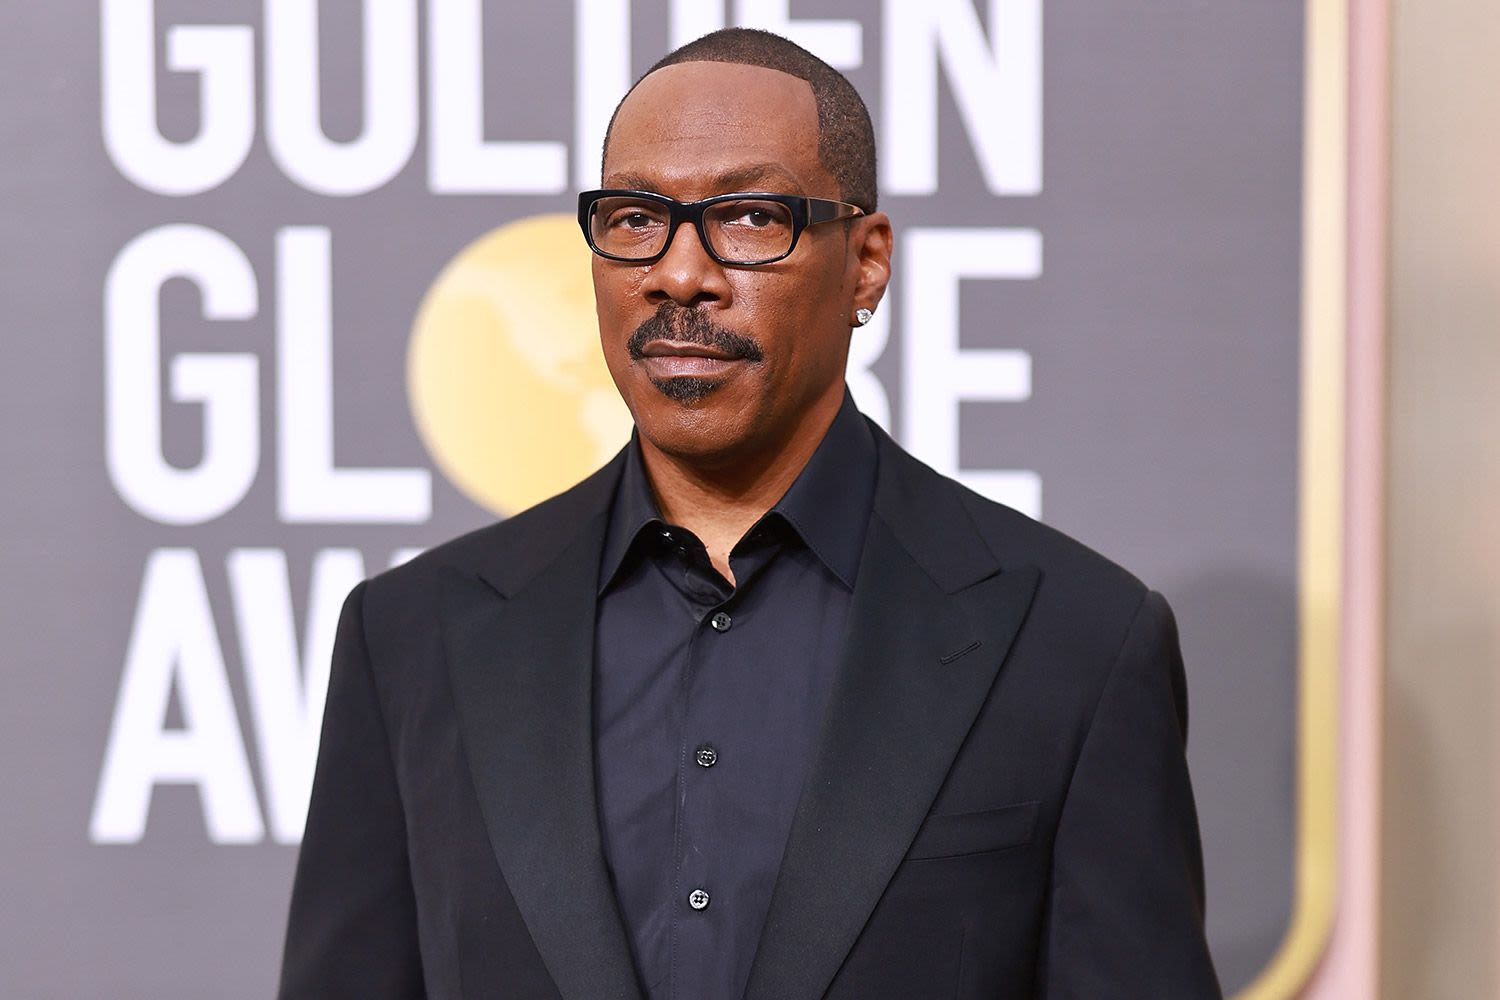 8 Crew Members Hospitalized Following Two-Vehicle Accident on Set of Eddie Murphy Movie “The Pickup”